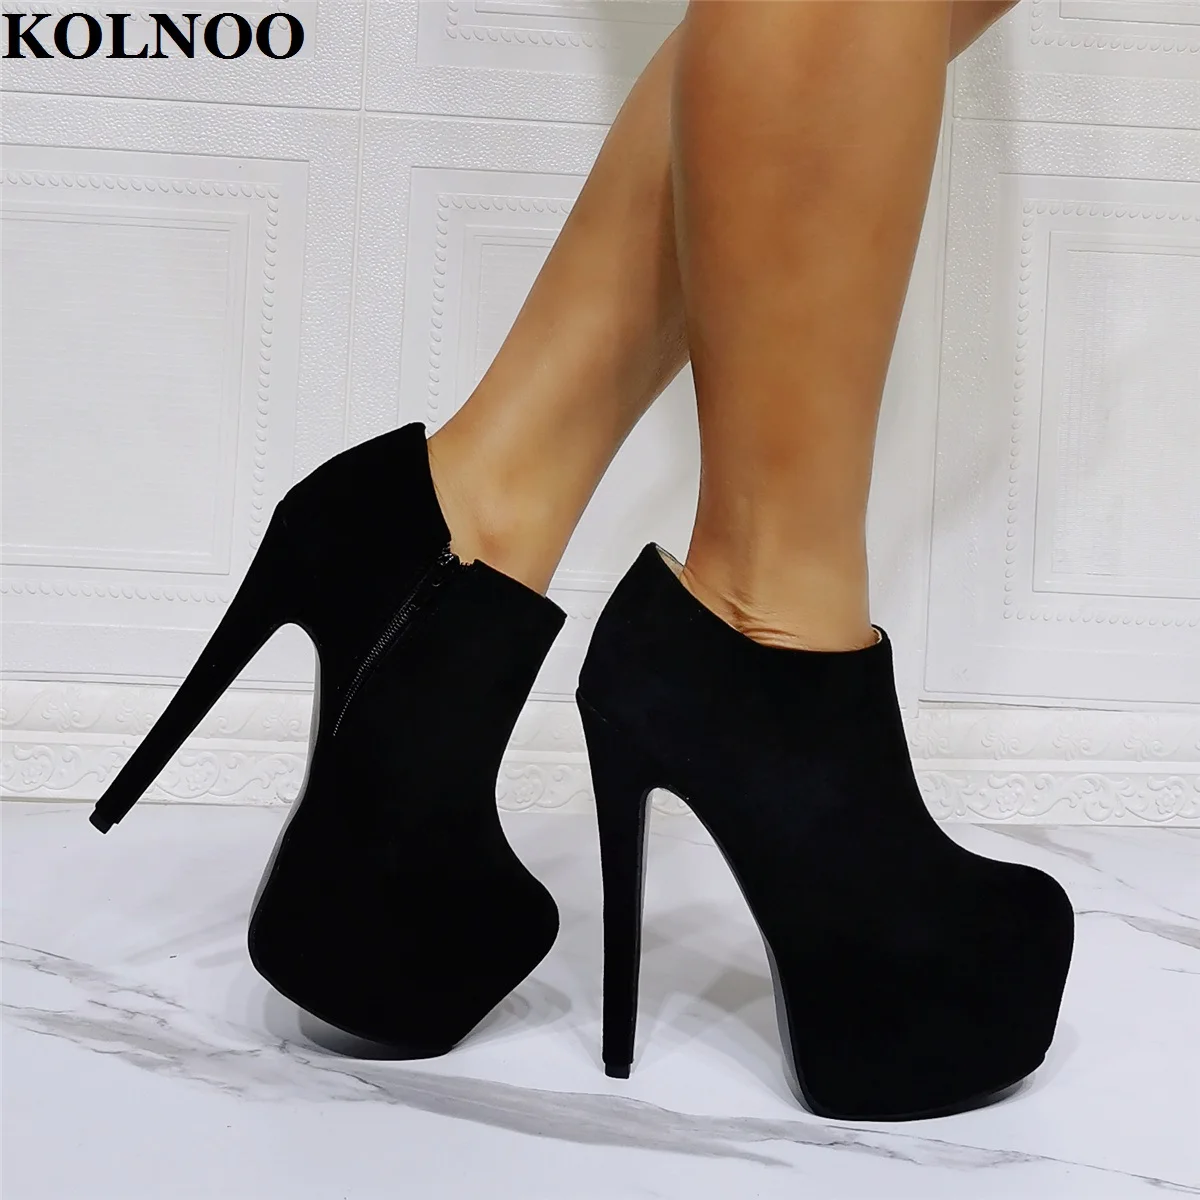 

Kolnoo Handmade New Womens High Heels Boots Faux-Suede Leather Sexy Platform Round-Toe Real-Photos Fashion Ankle Booties Shoes